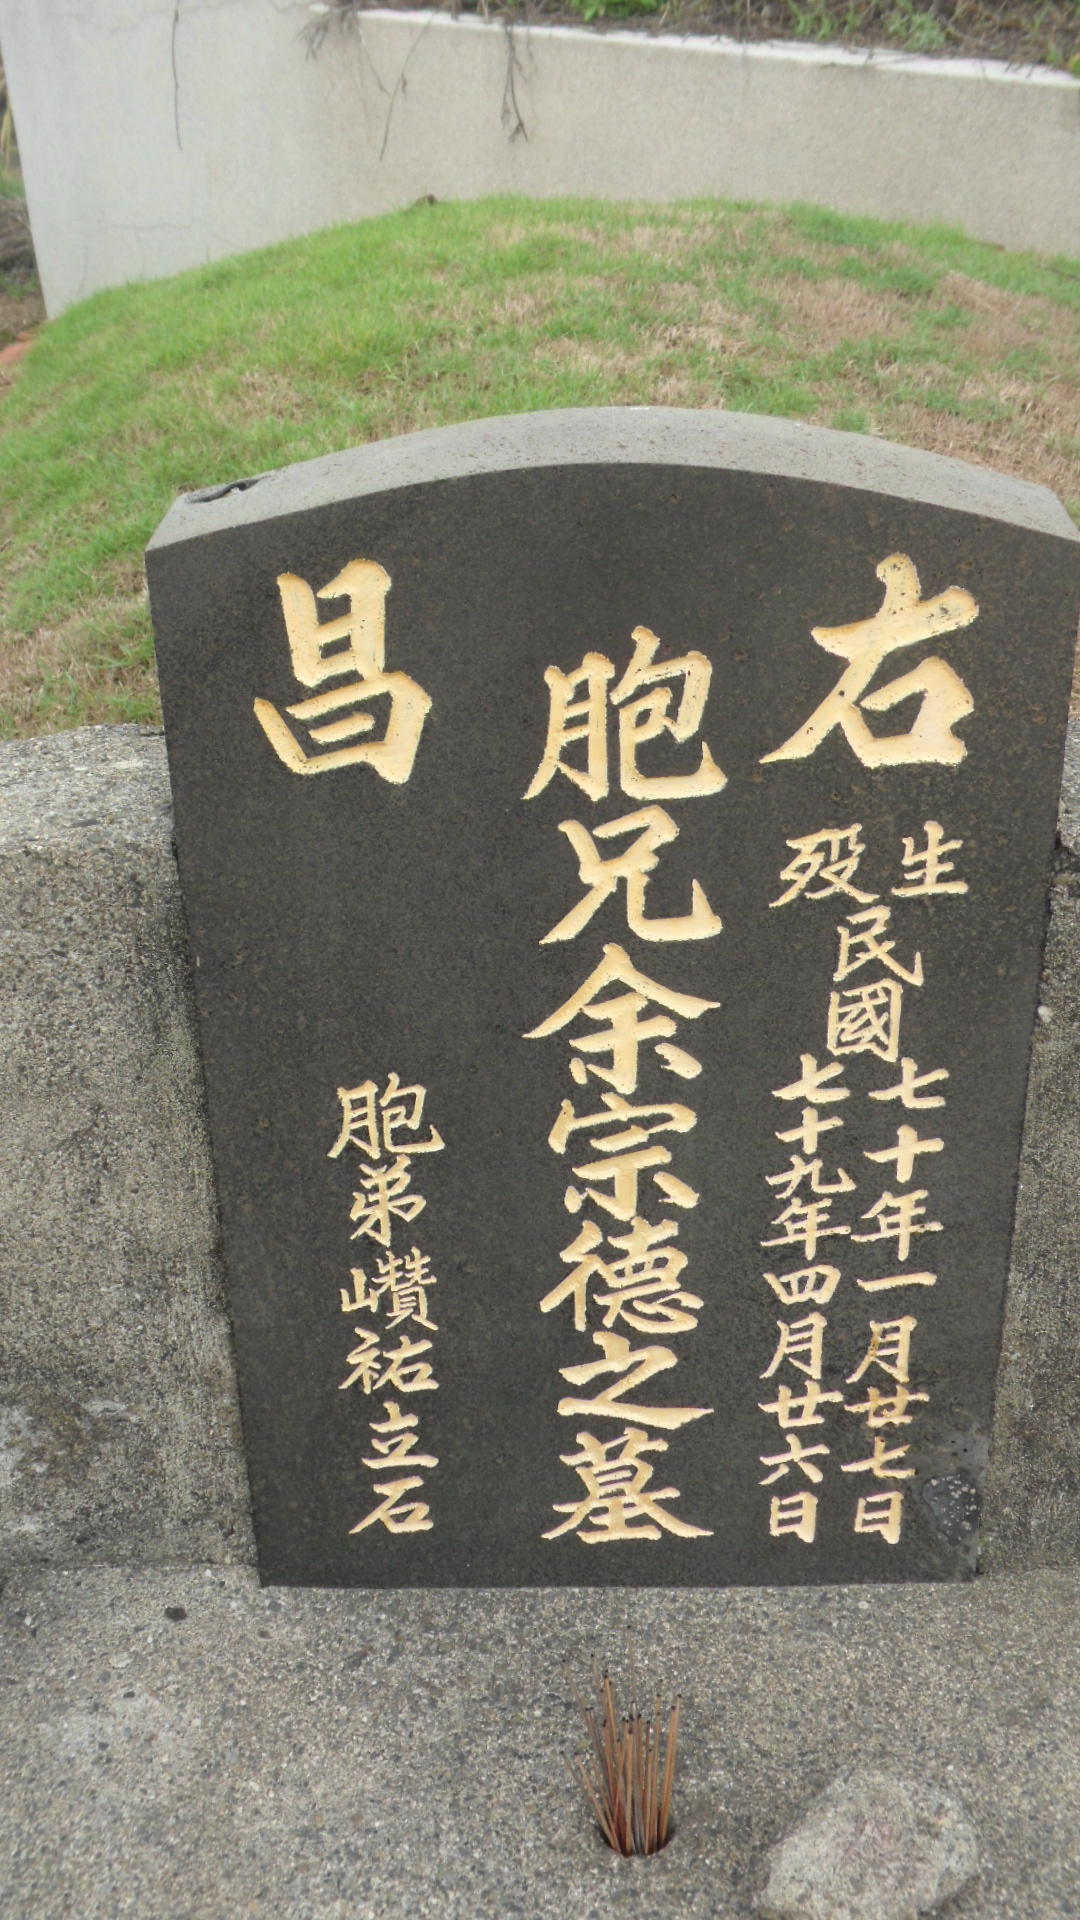 Tombstone of 余 (YU2) family at Taiwan, Gaoxiongxian, Qiaotouxiang, Jiawei. The tombstone-ID is 20895; 台灣，高雄縣，橋頭鄉，甲圍，余姓之墓碑。